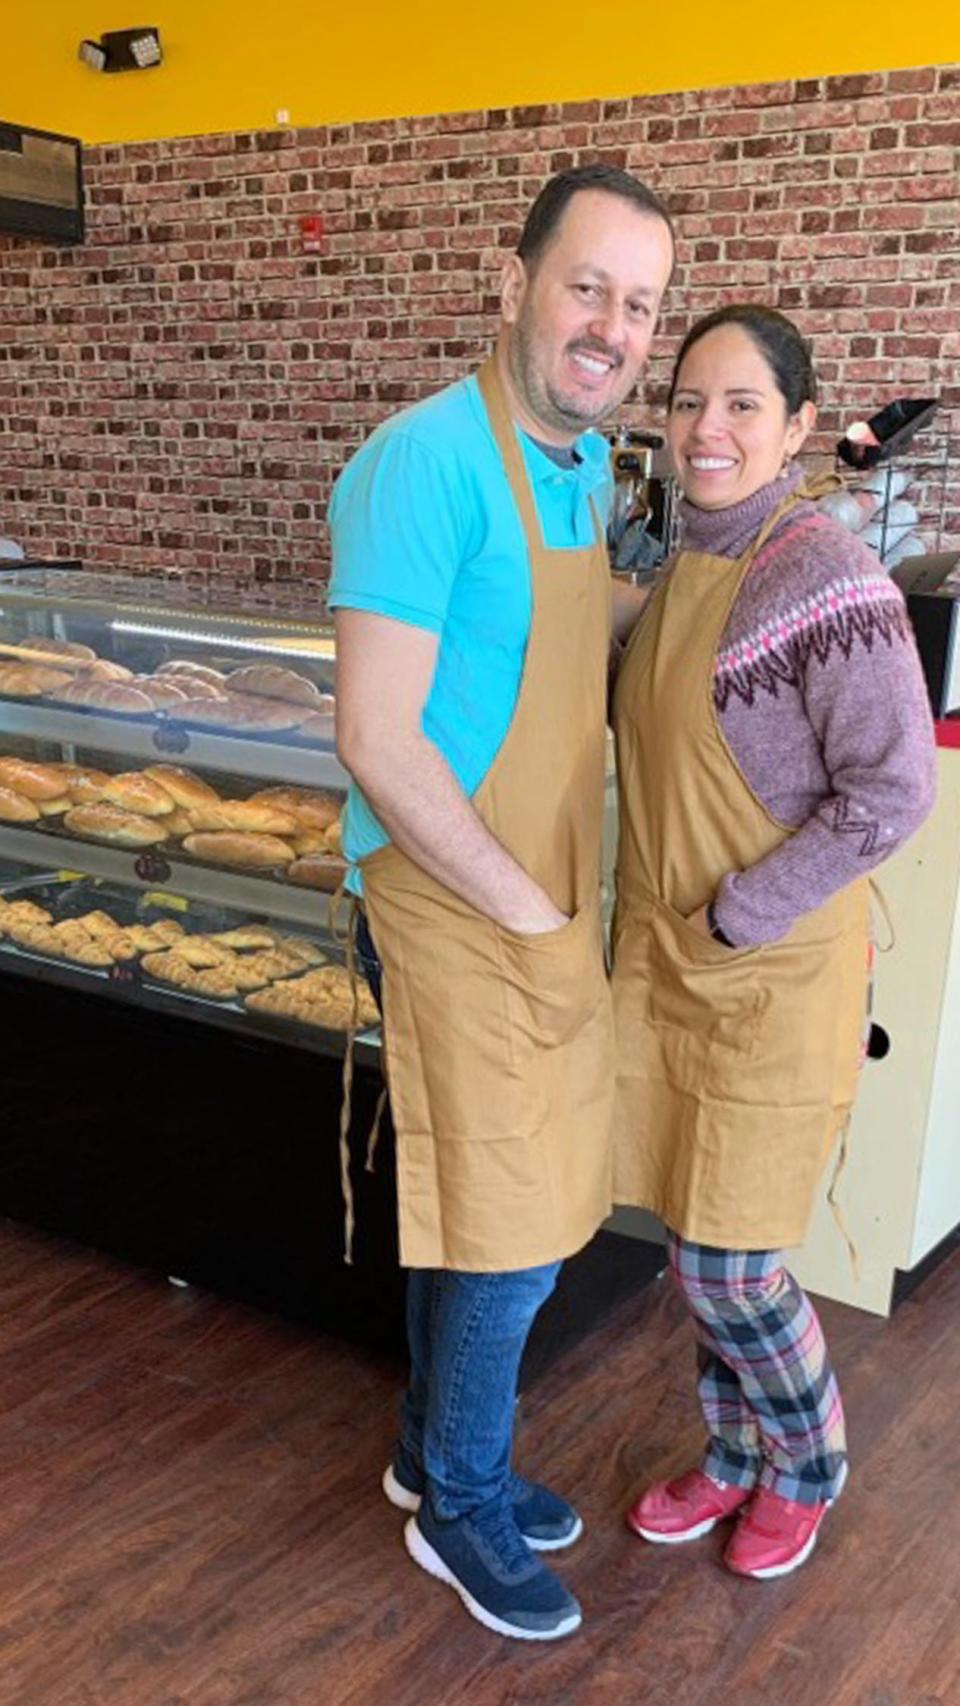 Owners Mauricio Valencia, left, and Marly Orjuela, stand inside Bakery Bethlehem, which the couple opened earlier this month in Levittown.